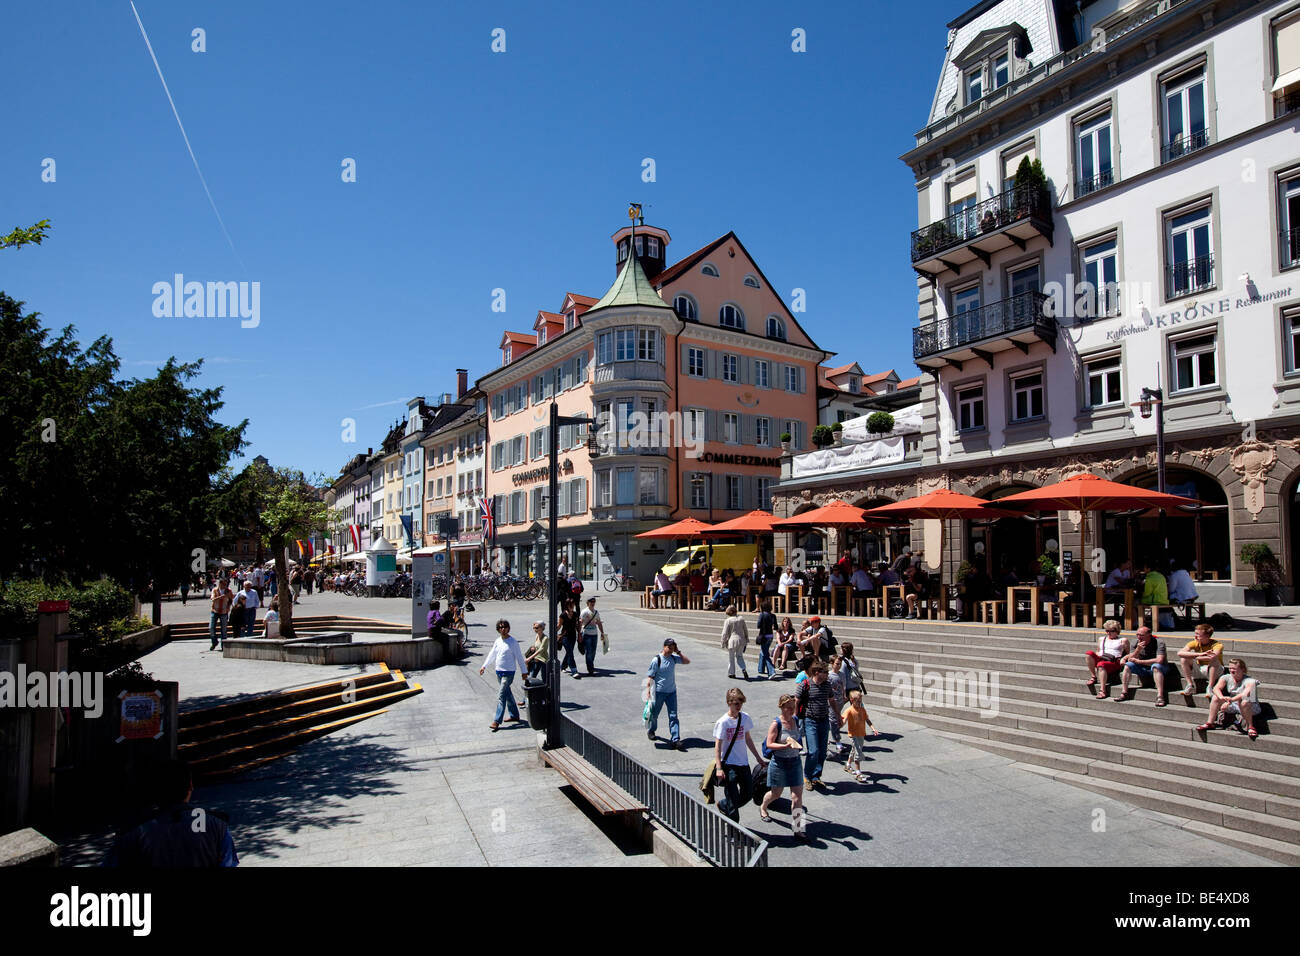 Tourists sitting in a pavement cafe at the Marktstrasse street, Konstanz, Lake Constance, Baden-Wuerttemberg, Germany, Europe Stock Photo